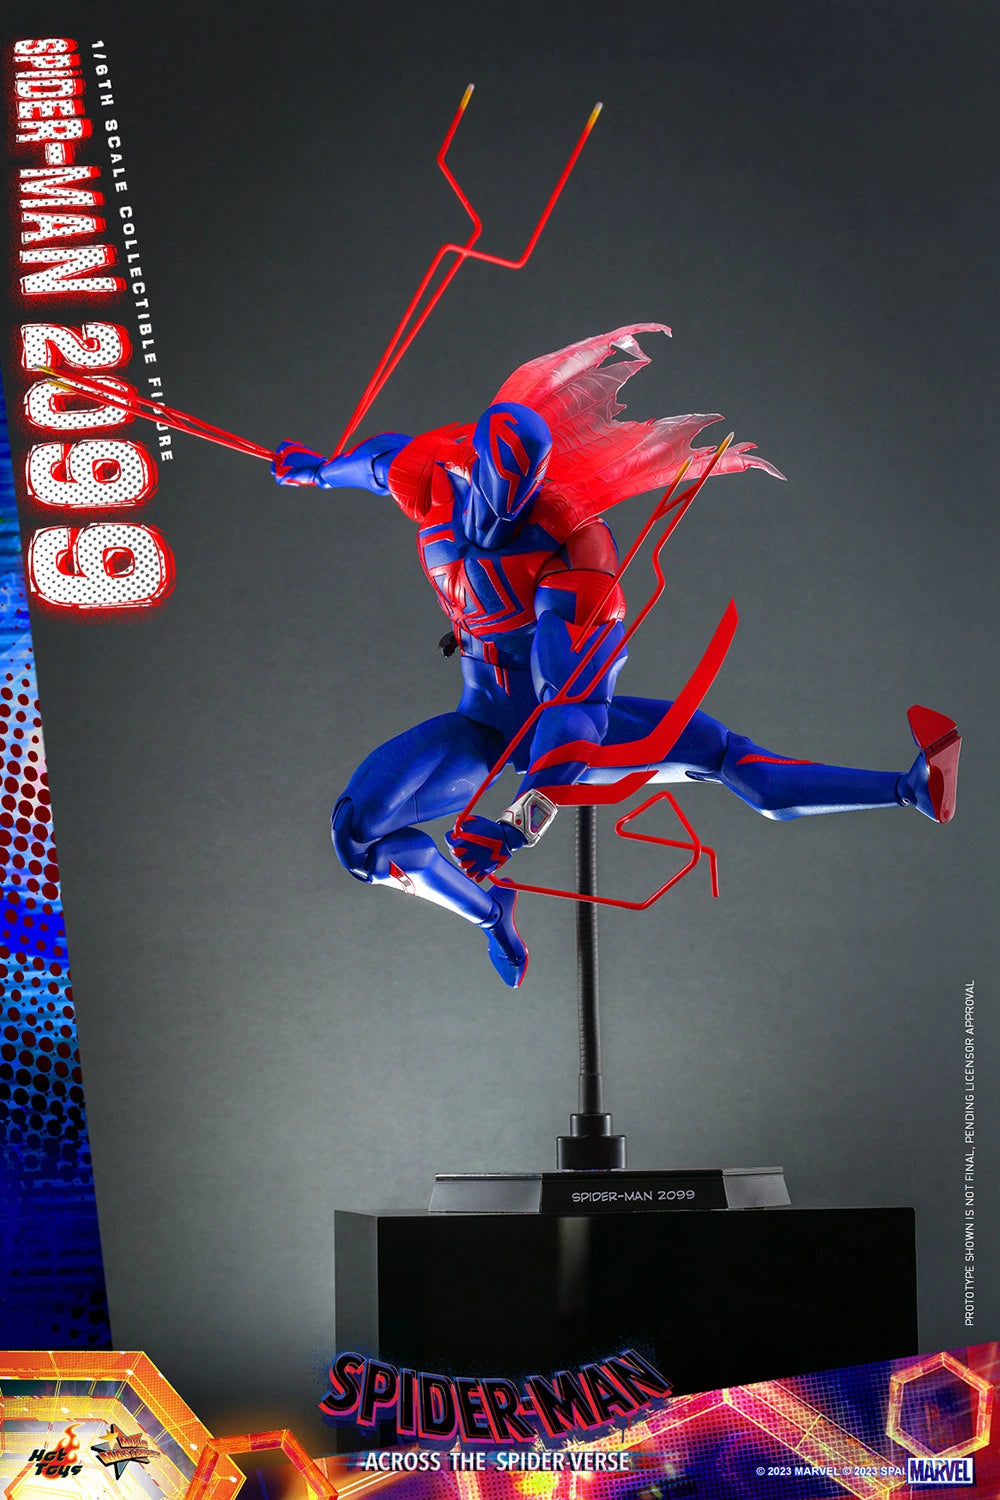 Hot Toys Spider-Man Across The Spider-Verse Spider-Man 2099 1/6th Scale  Figure